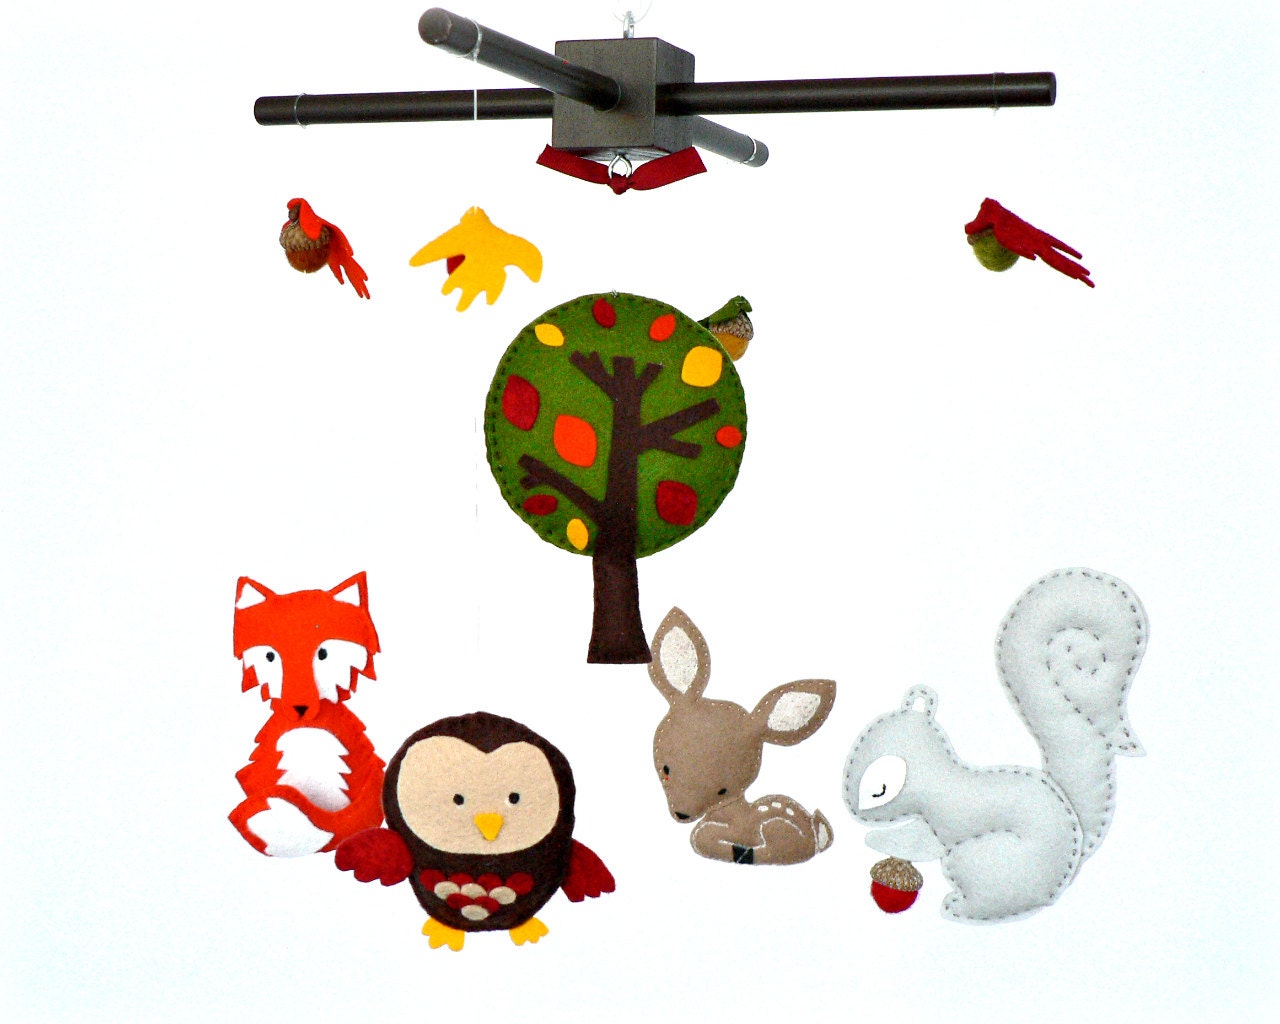 SALE - READY NOW - Woodland mobile - Forest mobile - baby crib mobile - deer - fox - owl - squirrel - acorns - nursery decor - LullabyMobiles